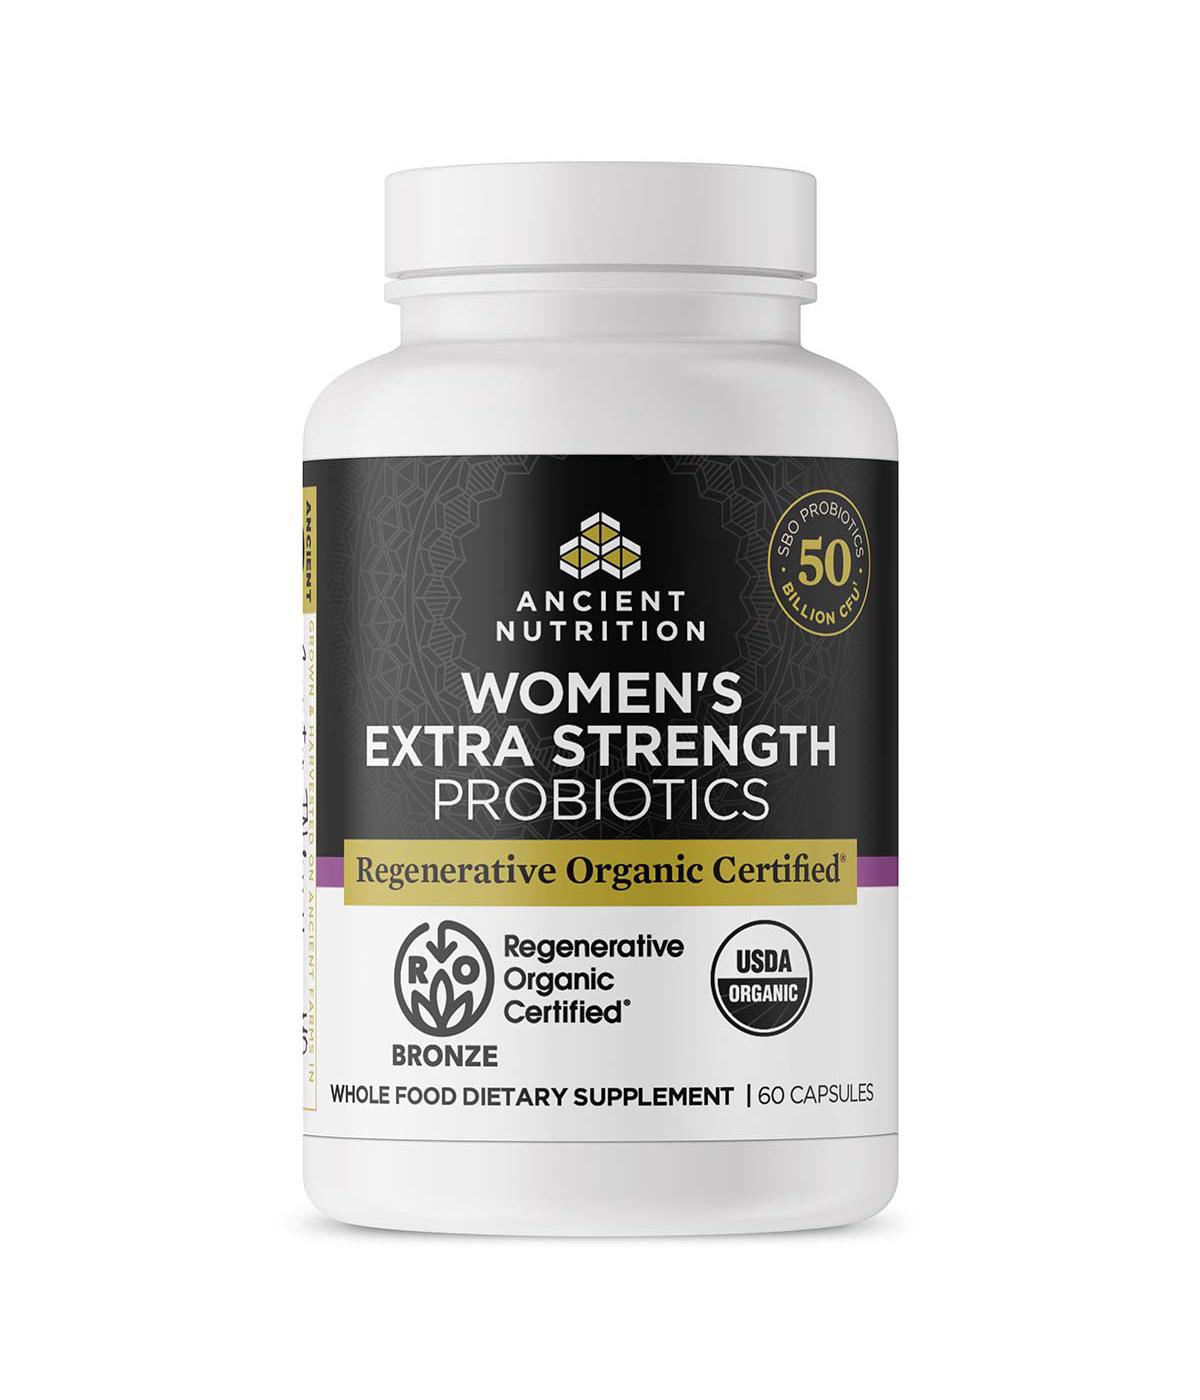 Ancient Nutrition Women's Extra Strength Probiotics Capsules; image 2 of 5